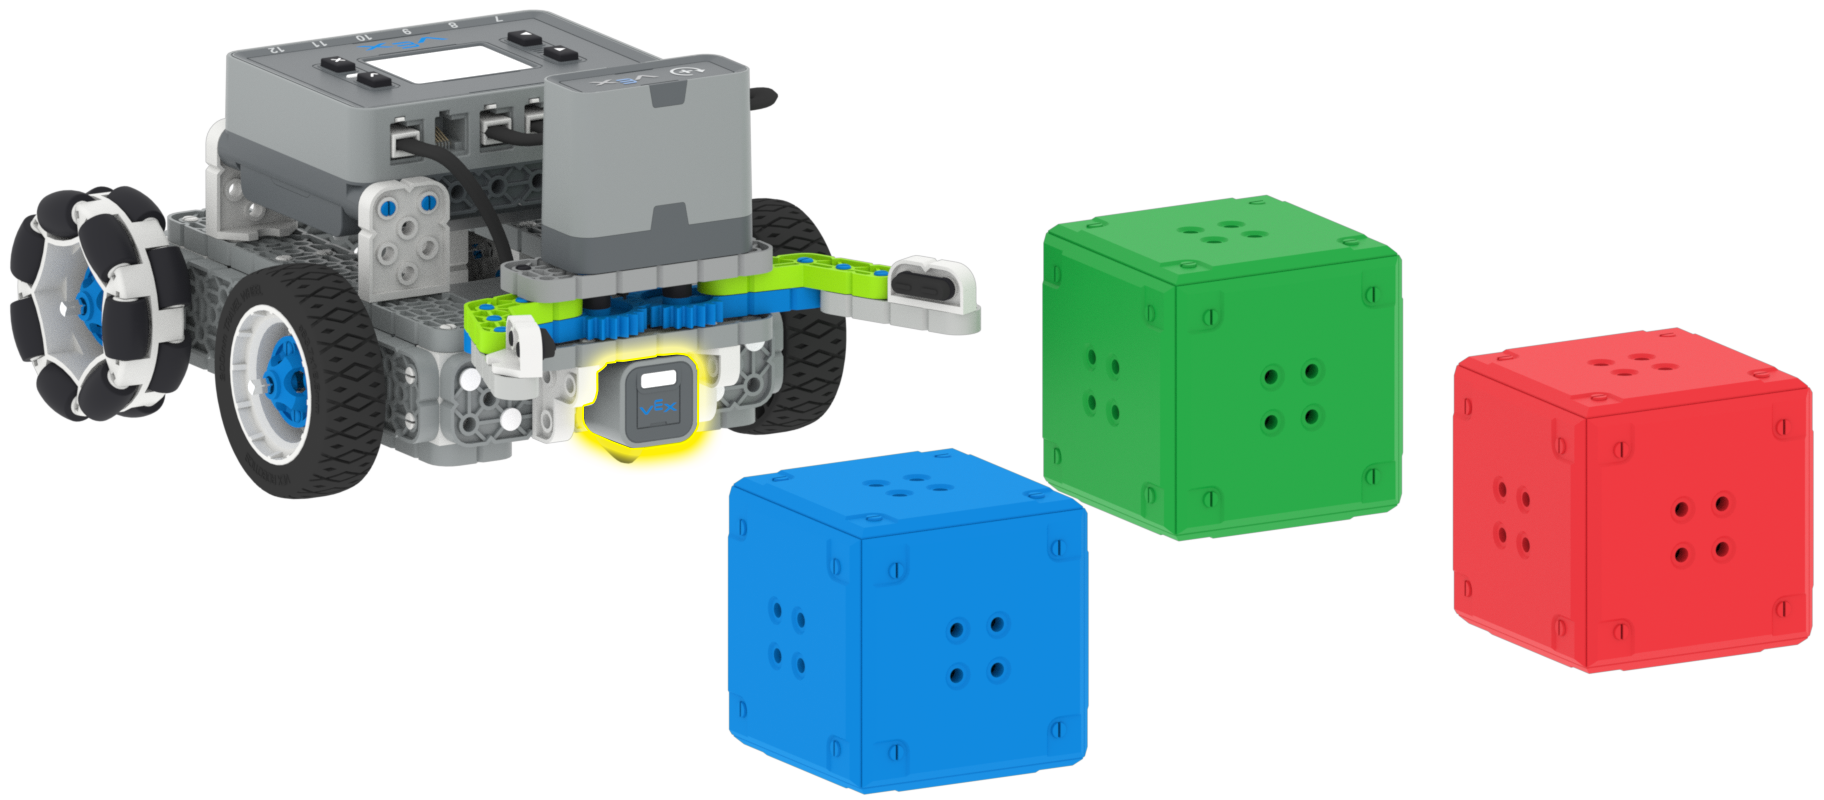 IQ_Gen_2_Simple_Clawbot_with_Cubes-OpticalCallout.png